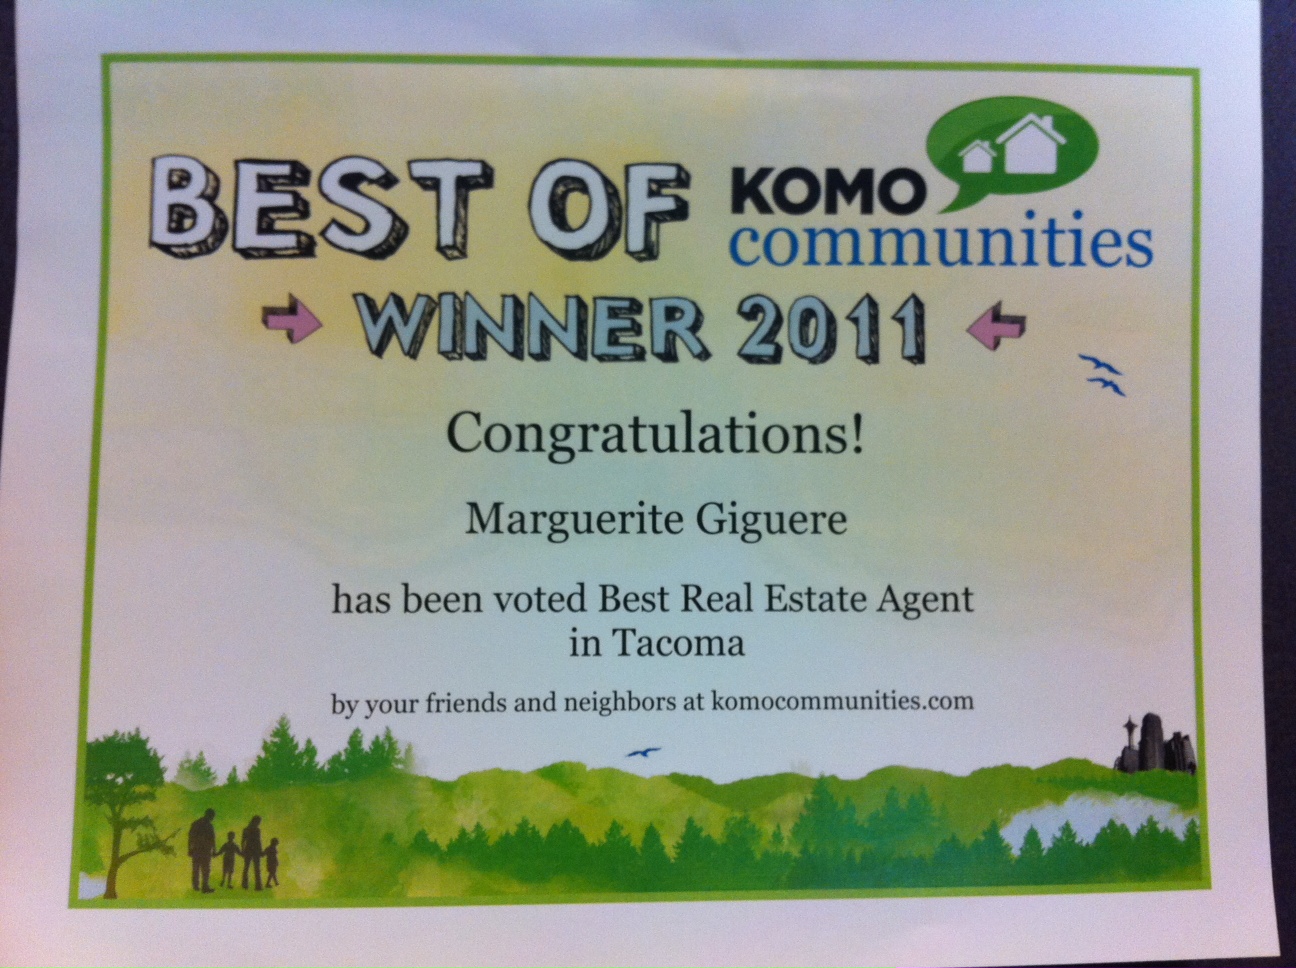 Thank You For Voting Me “Best Real Estate Agent” in Tacoma!